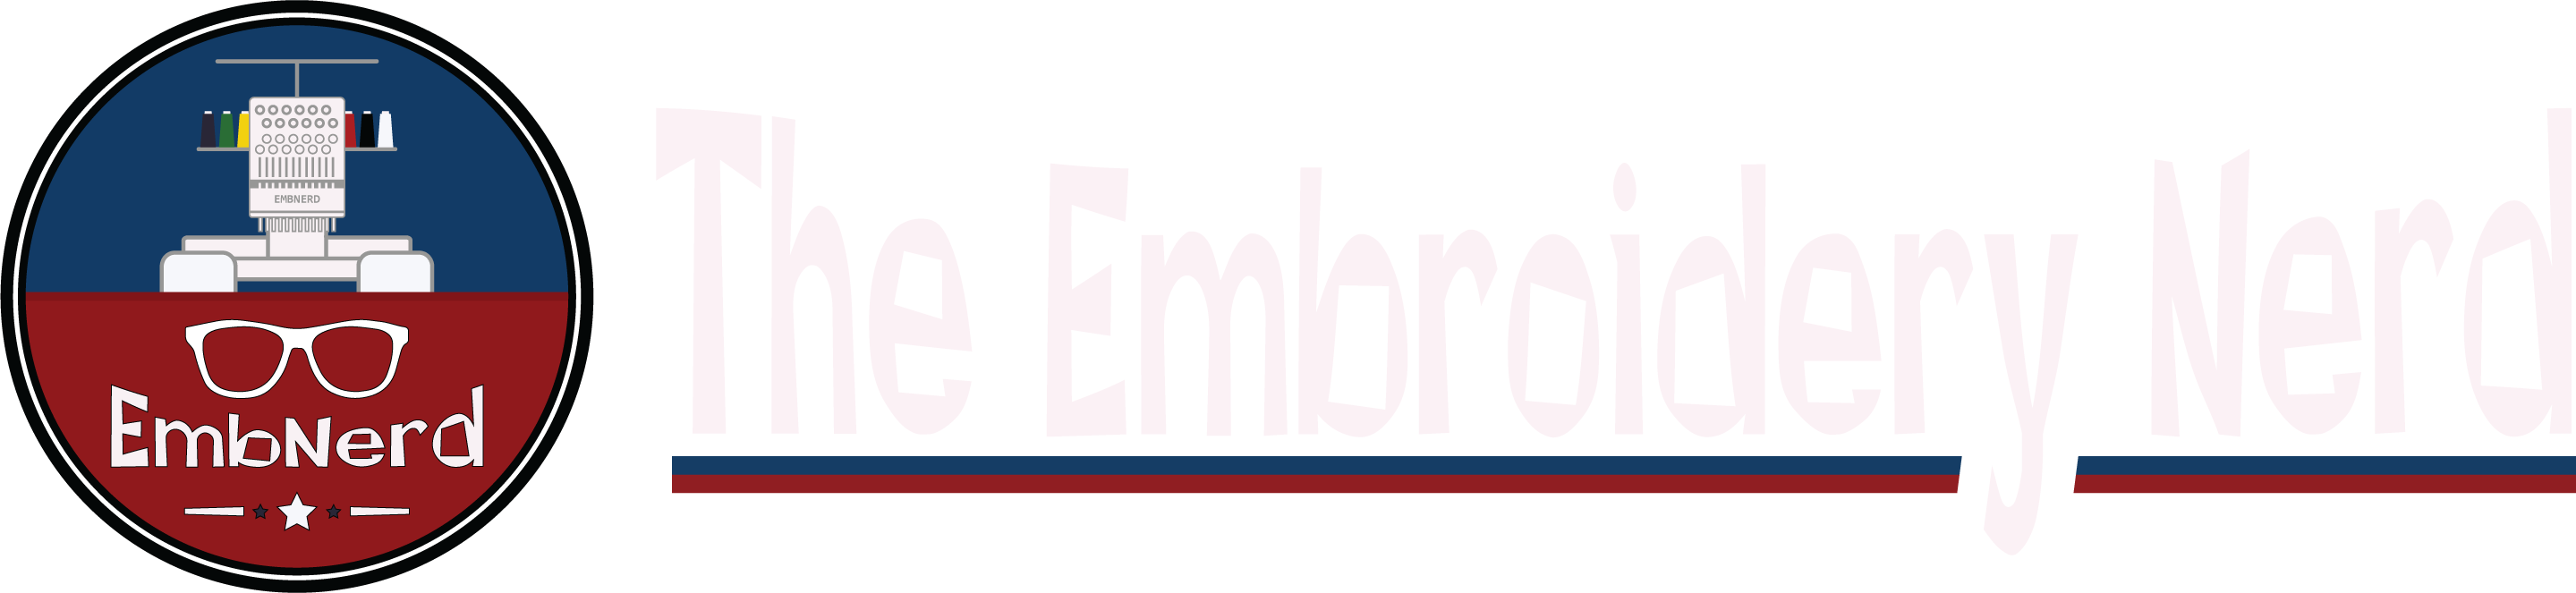 The Embroidery Nerd Logo